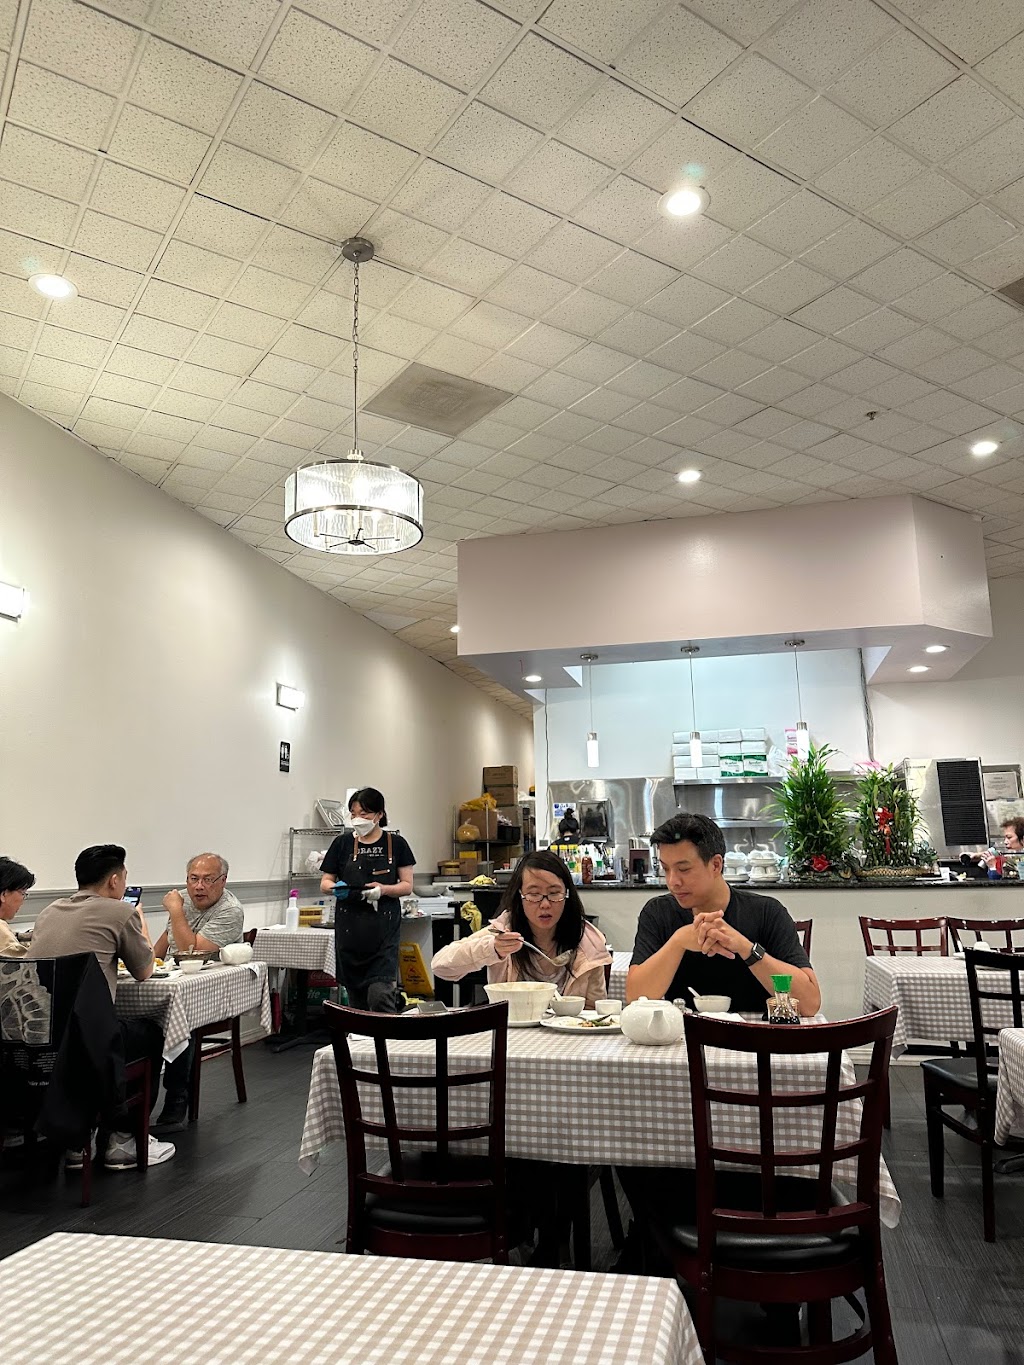 Best Asian Bistro | 4161 Cushing Pkwy, Fremont, CA 94538 | Phone: (510) 573-3902